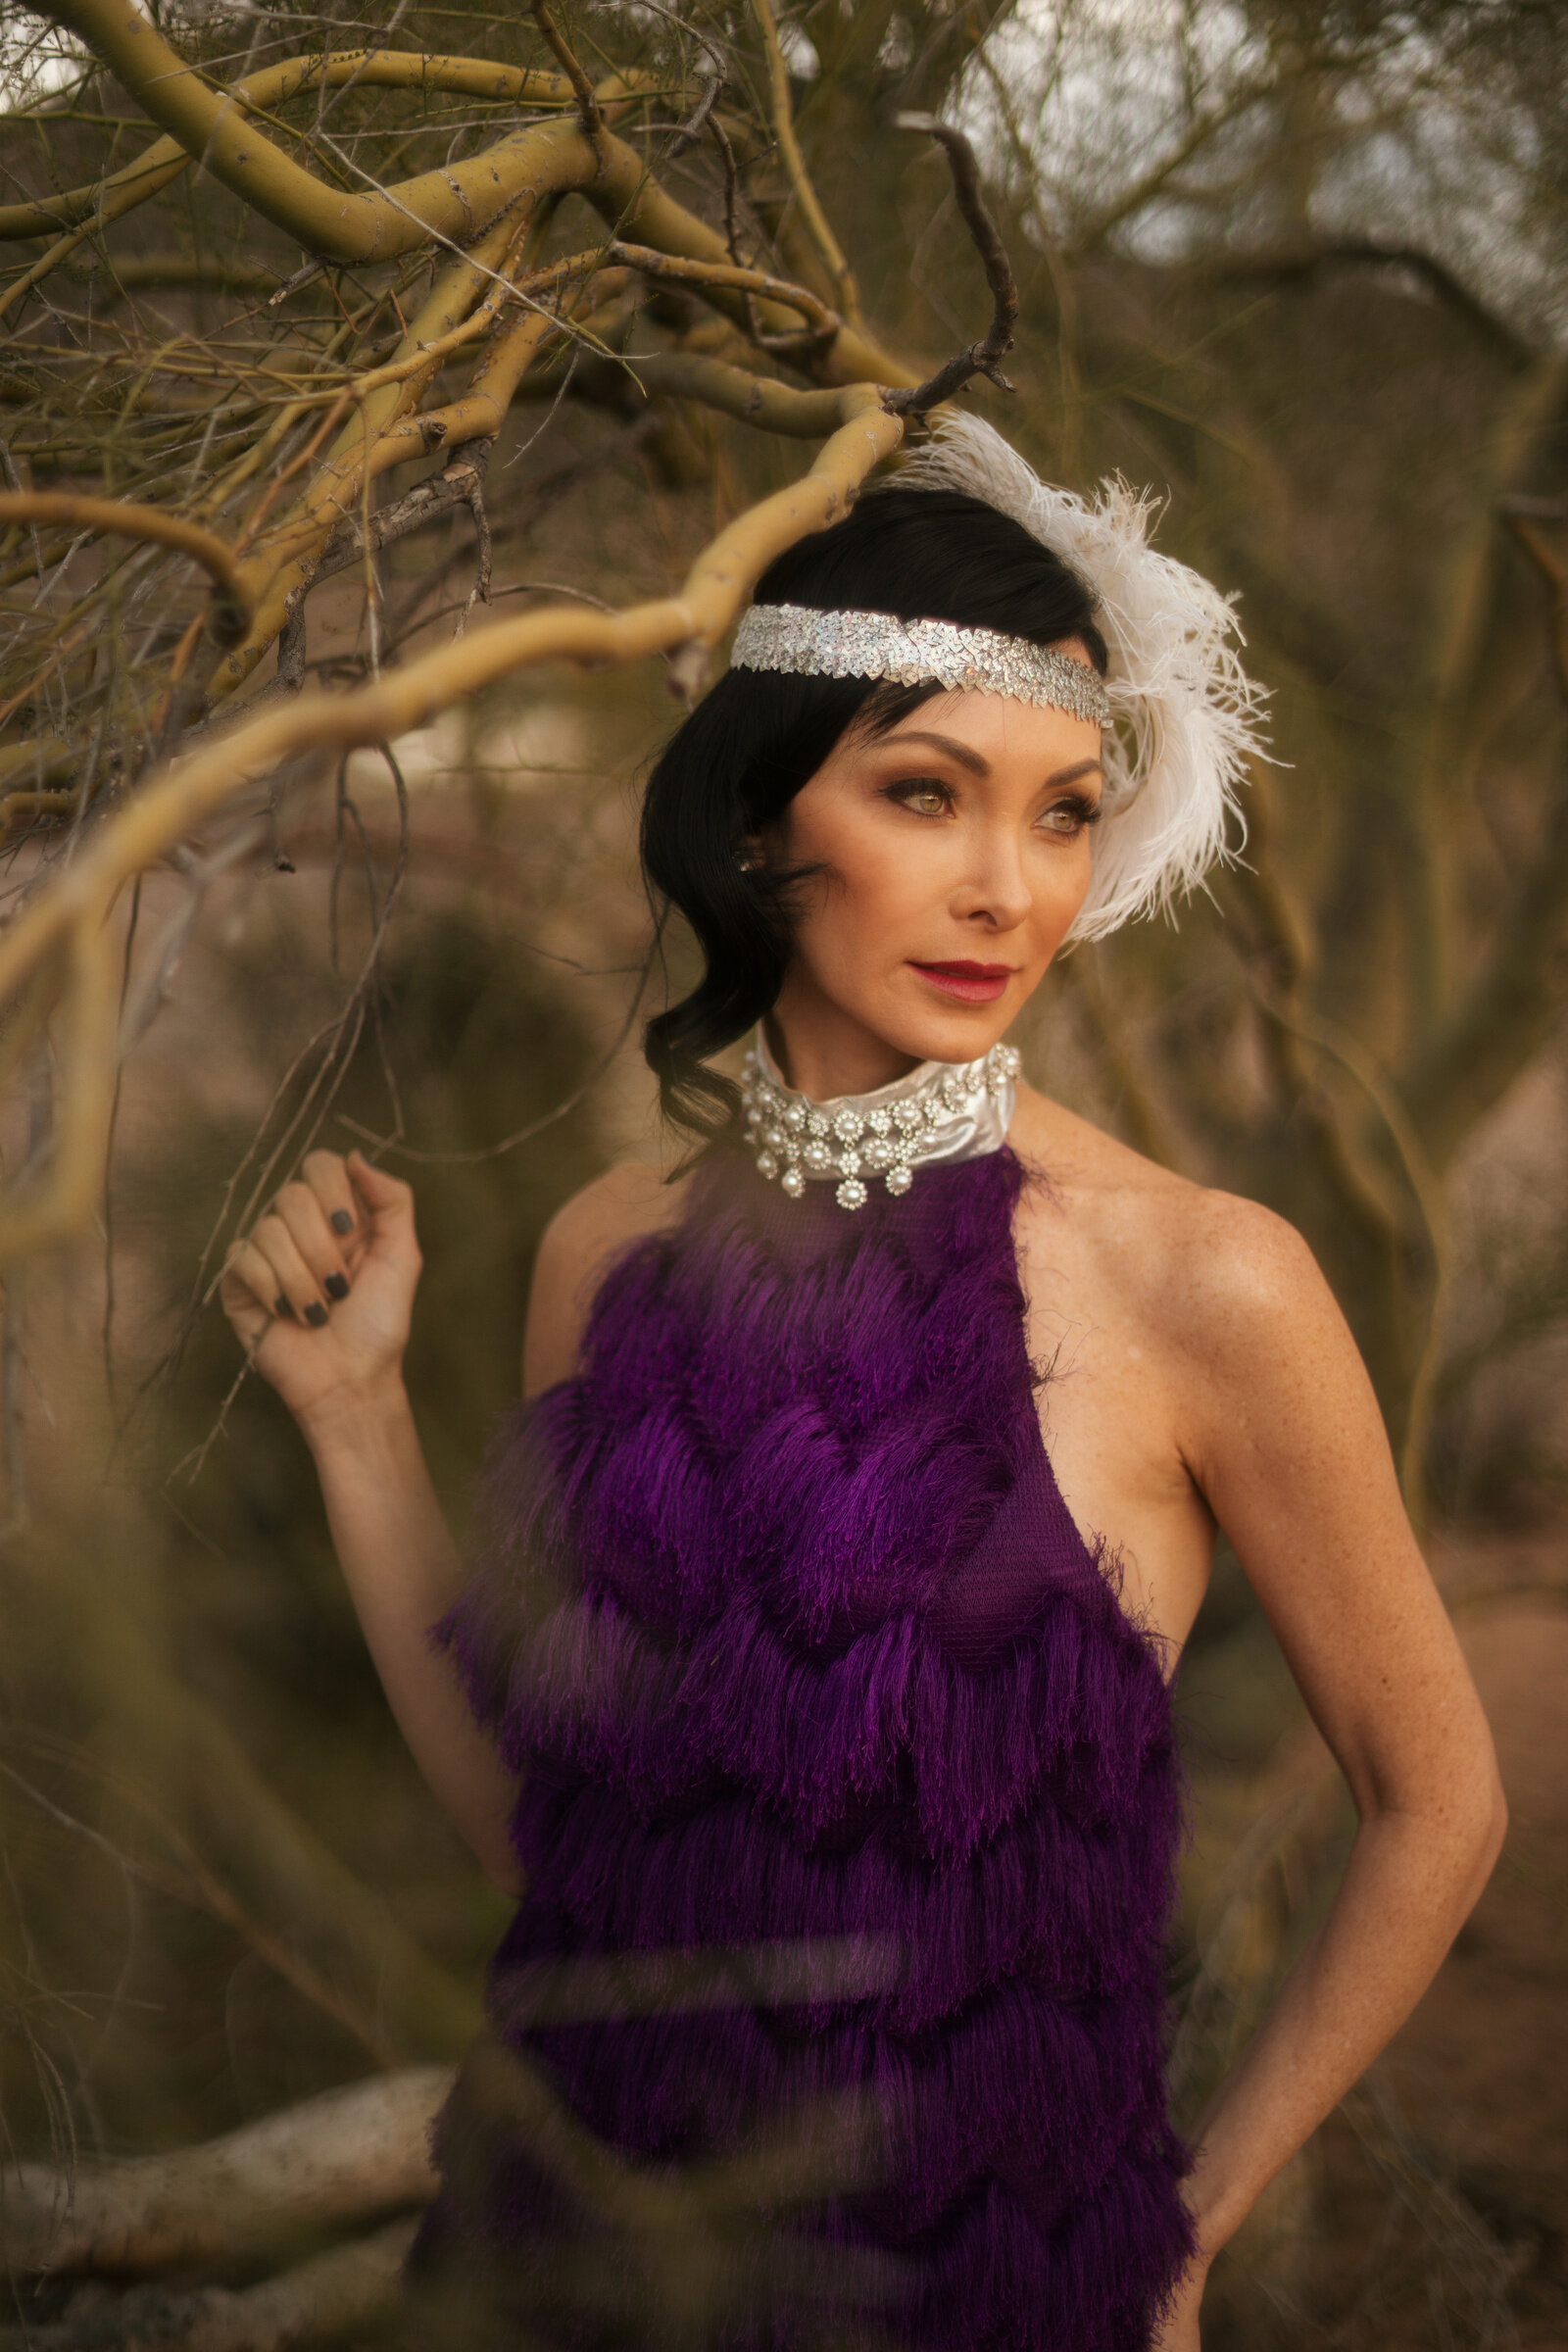 Bespoke purple fringe high collar dress accented with  silver jewelly.jpg